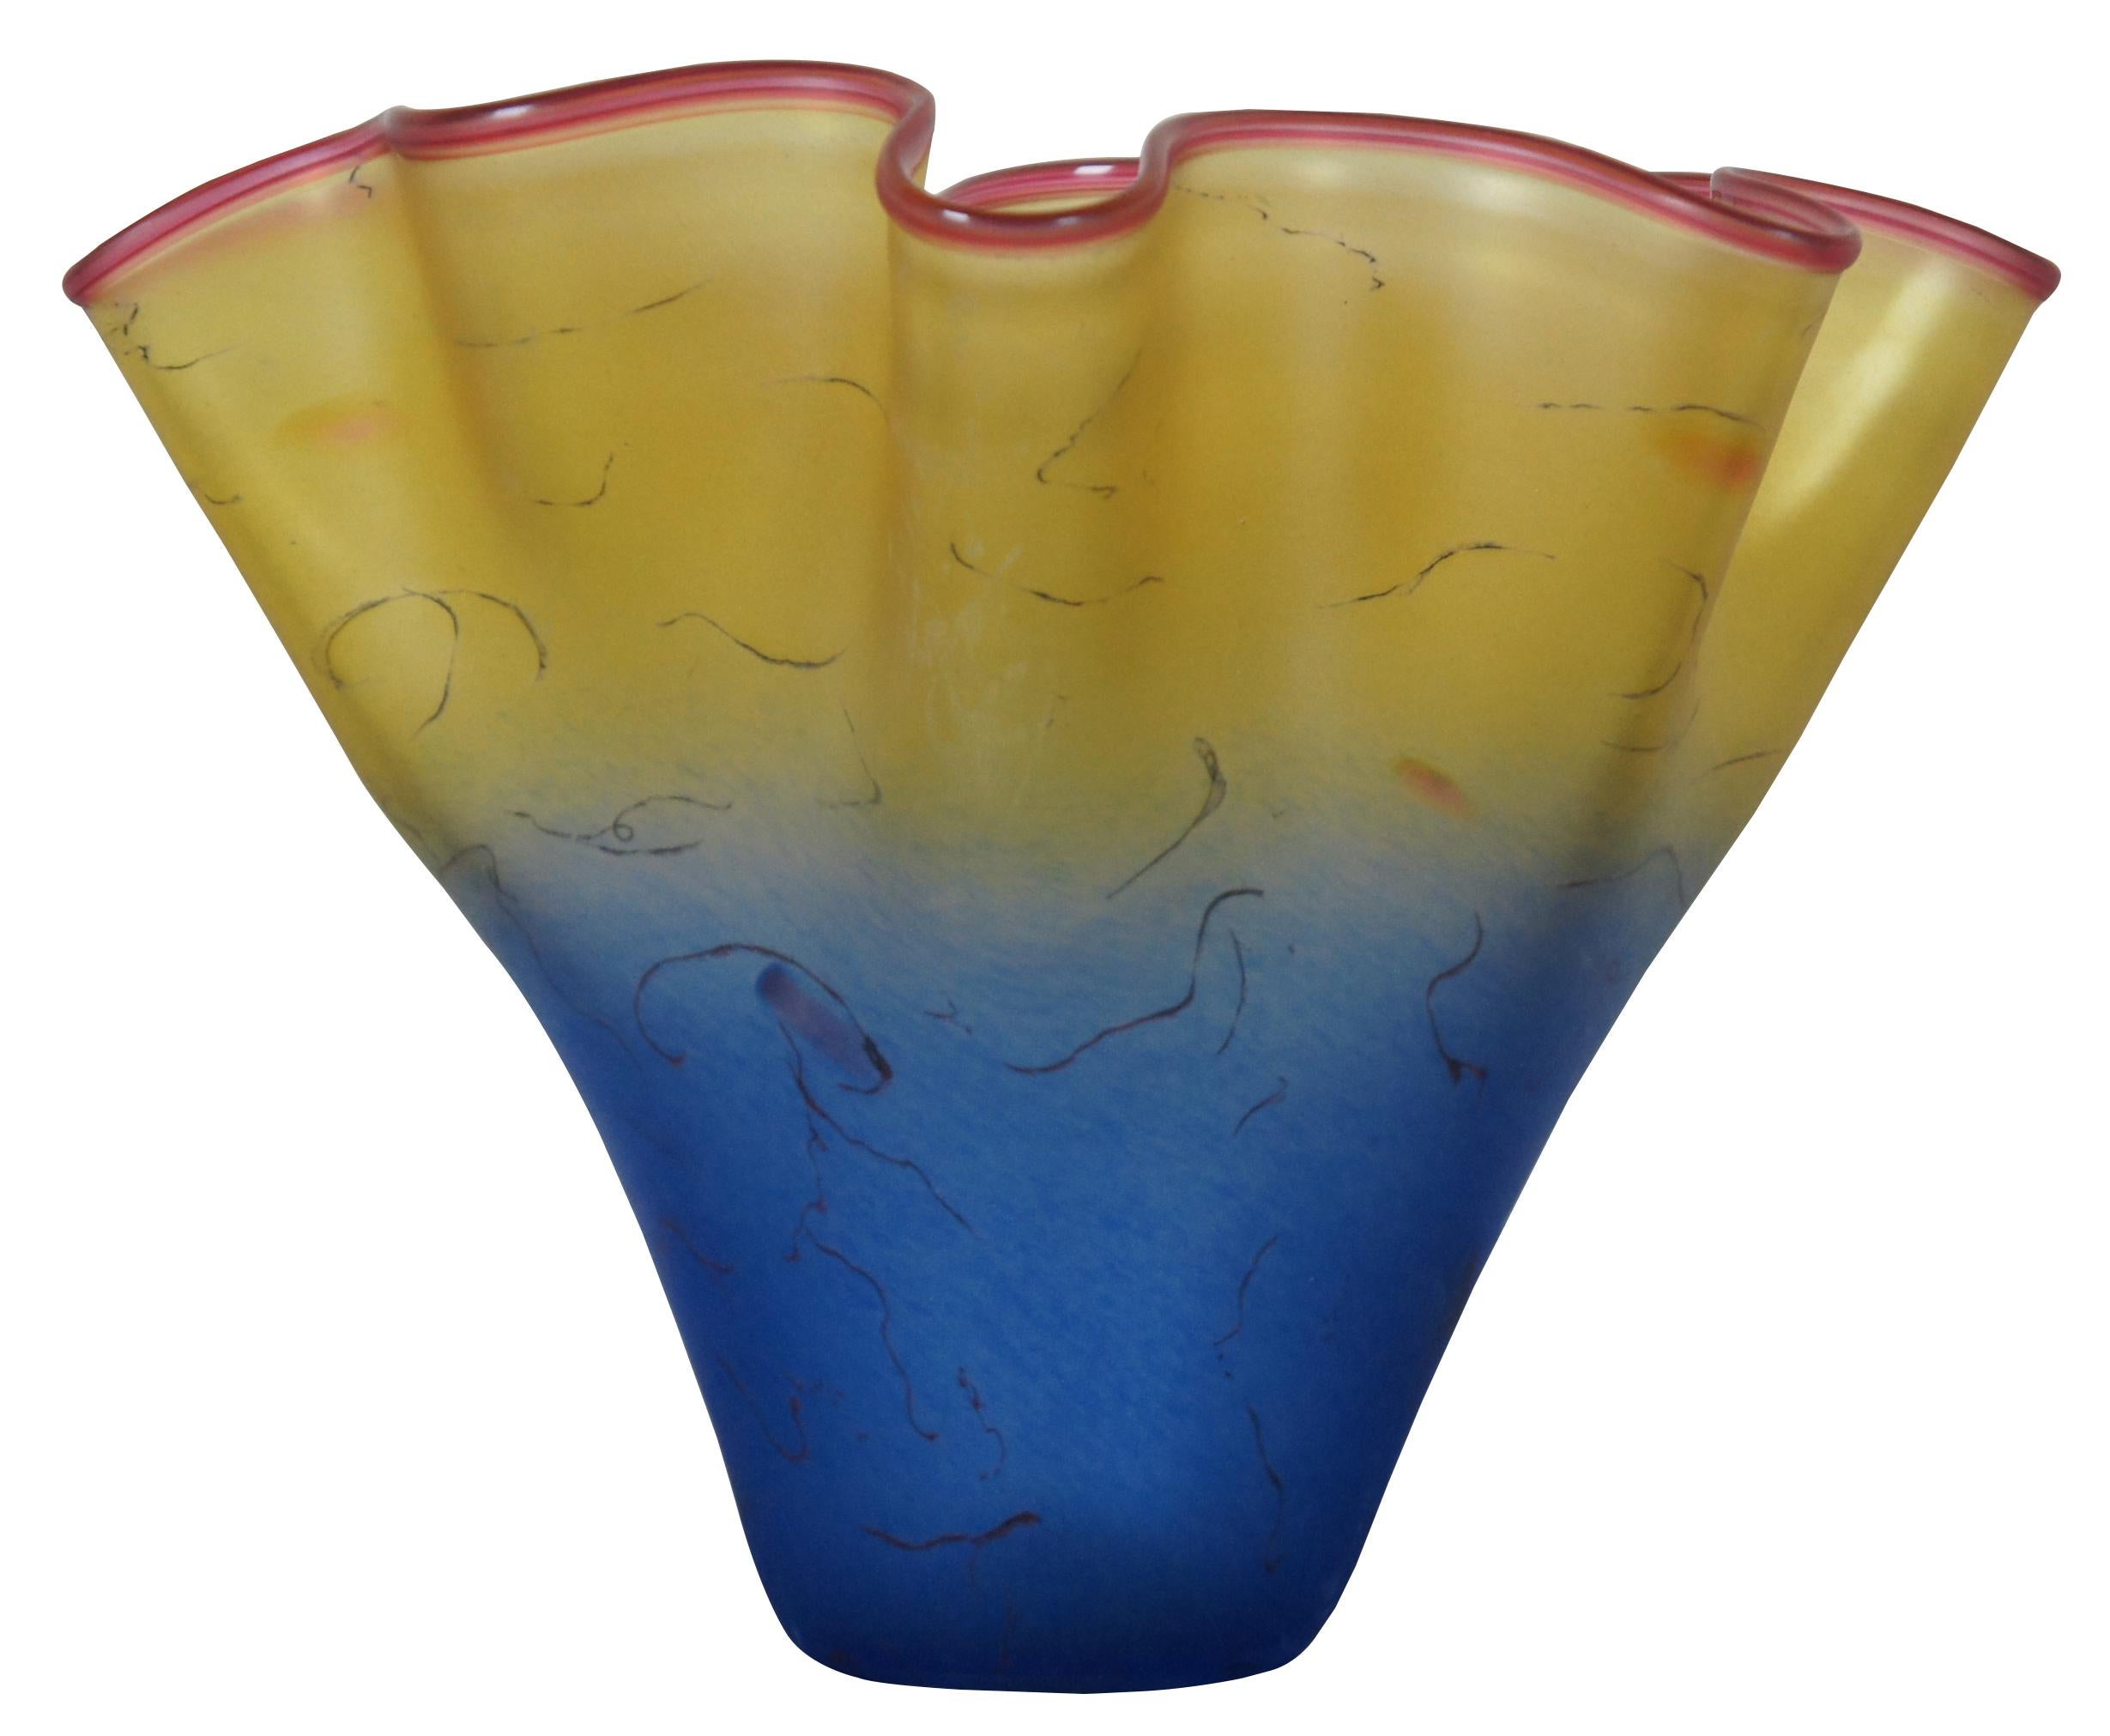 Curtis Brock freeform fluted centerpiece bowl or vase. A flurry of light, trailing lines accents this blown glass bowl with pink lip wrap. Hand-shaped; no two are exactly alike. Measure: 11